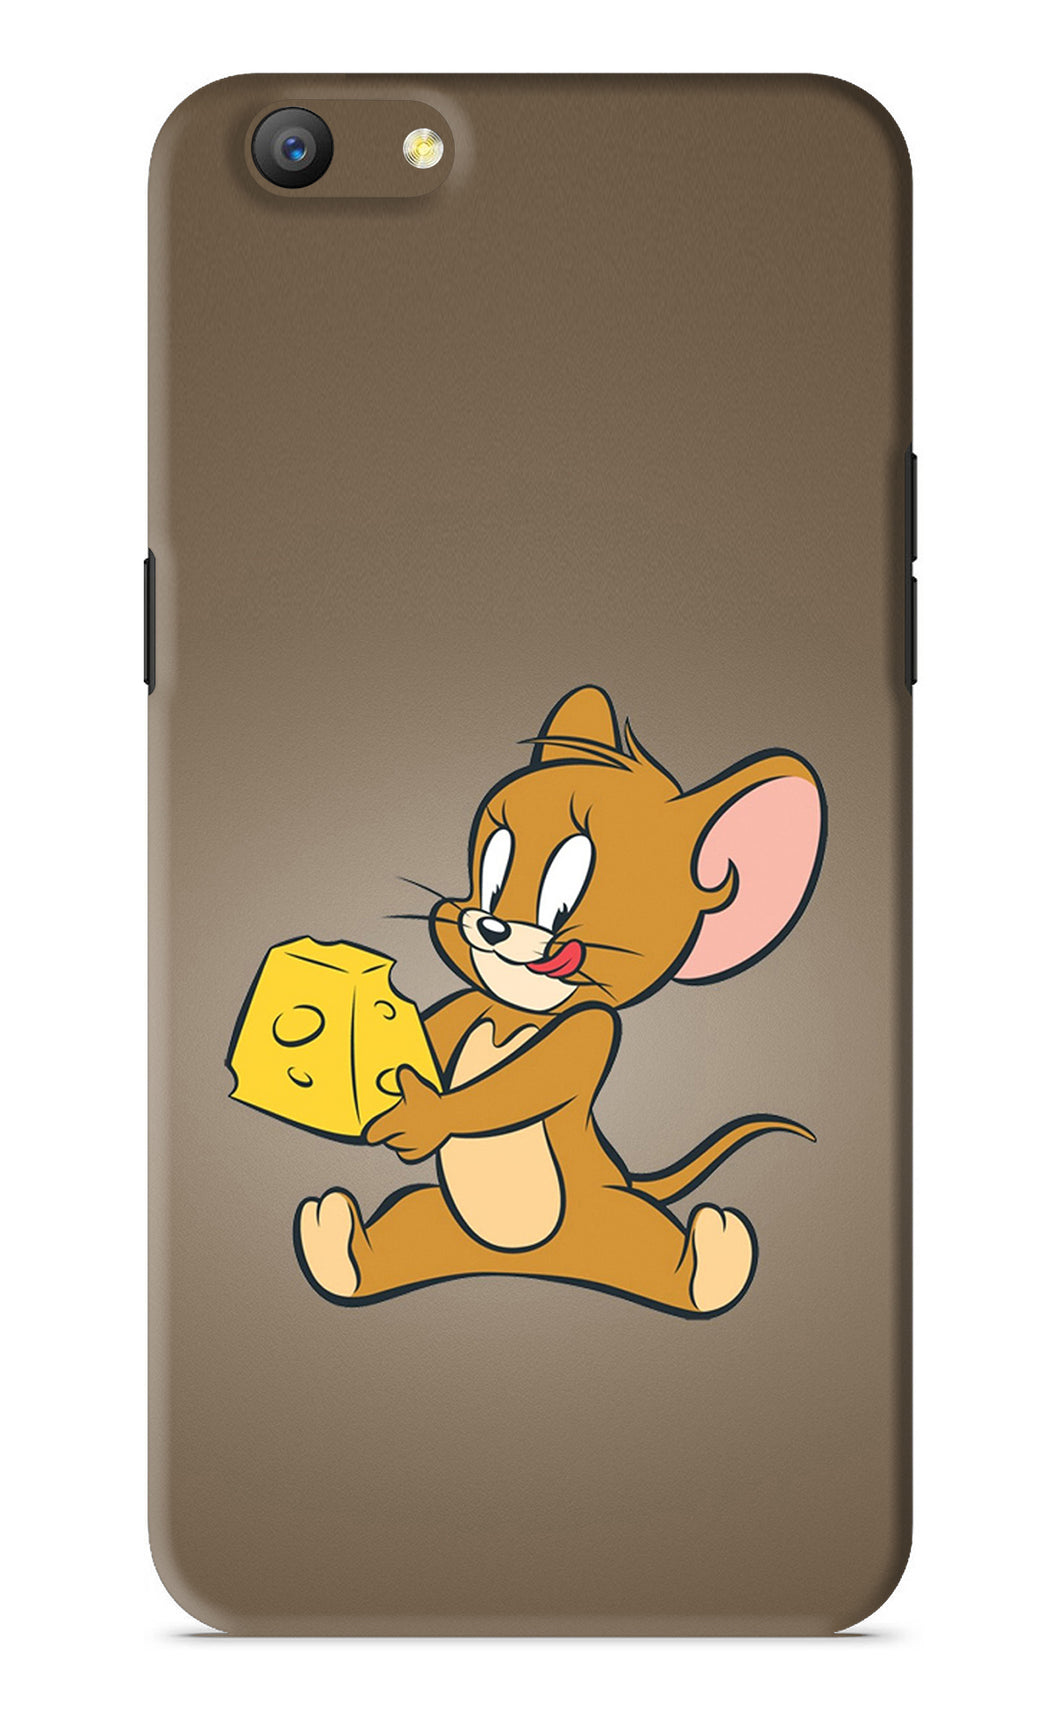 Jerry Oppo A57 Back Skin Wrap